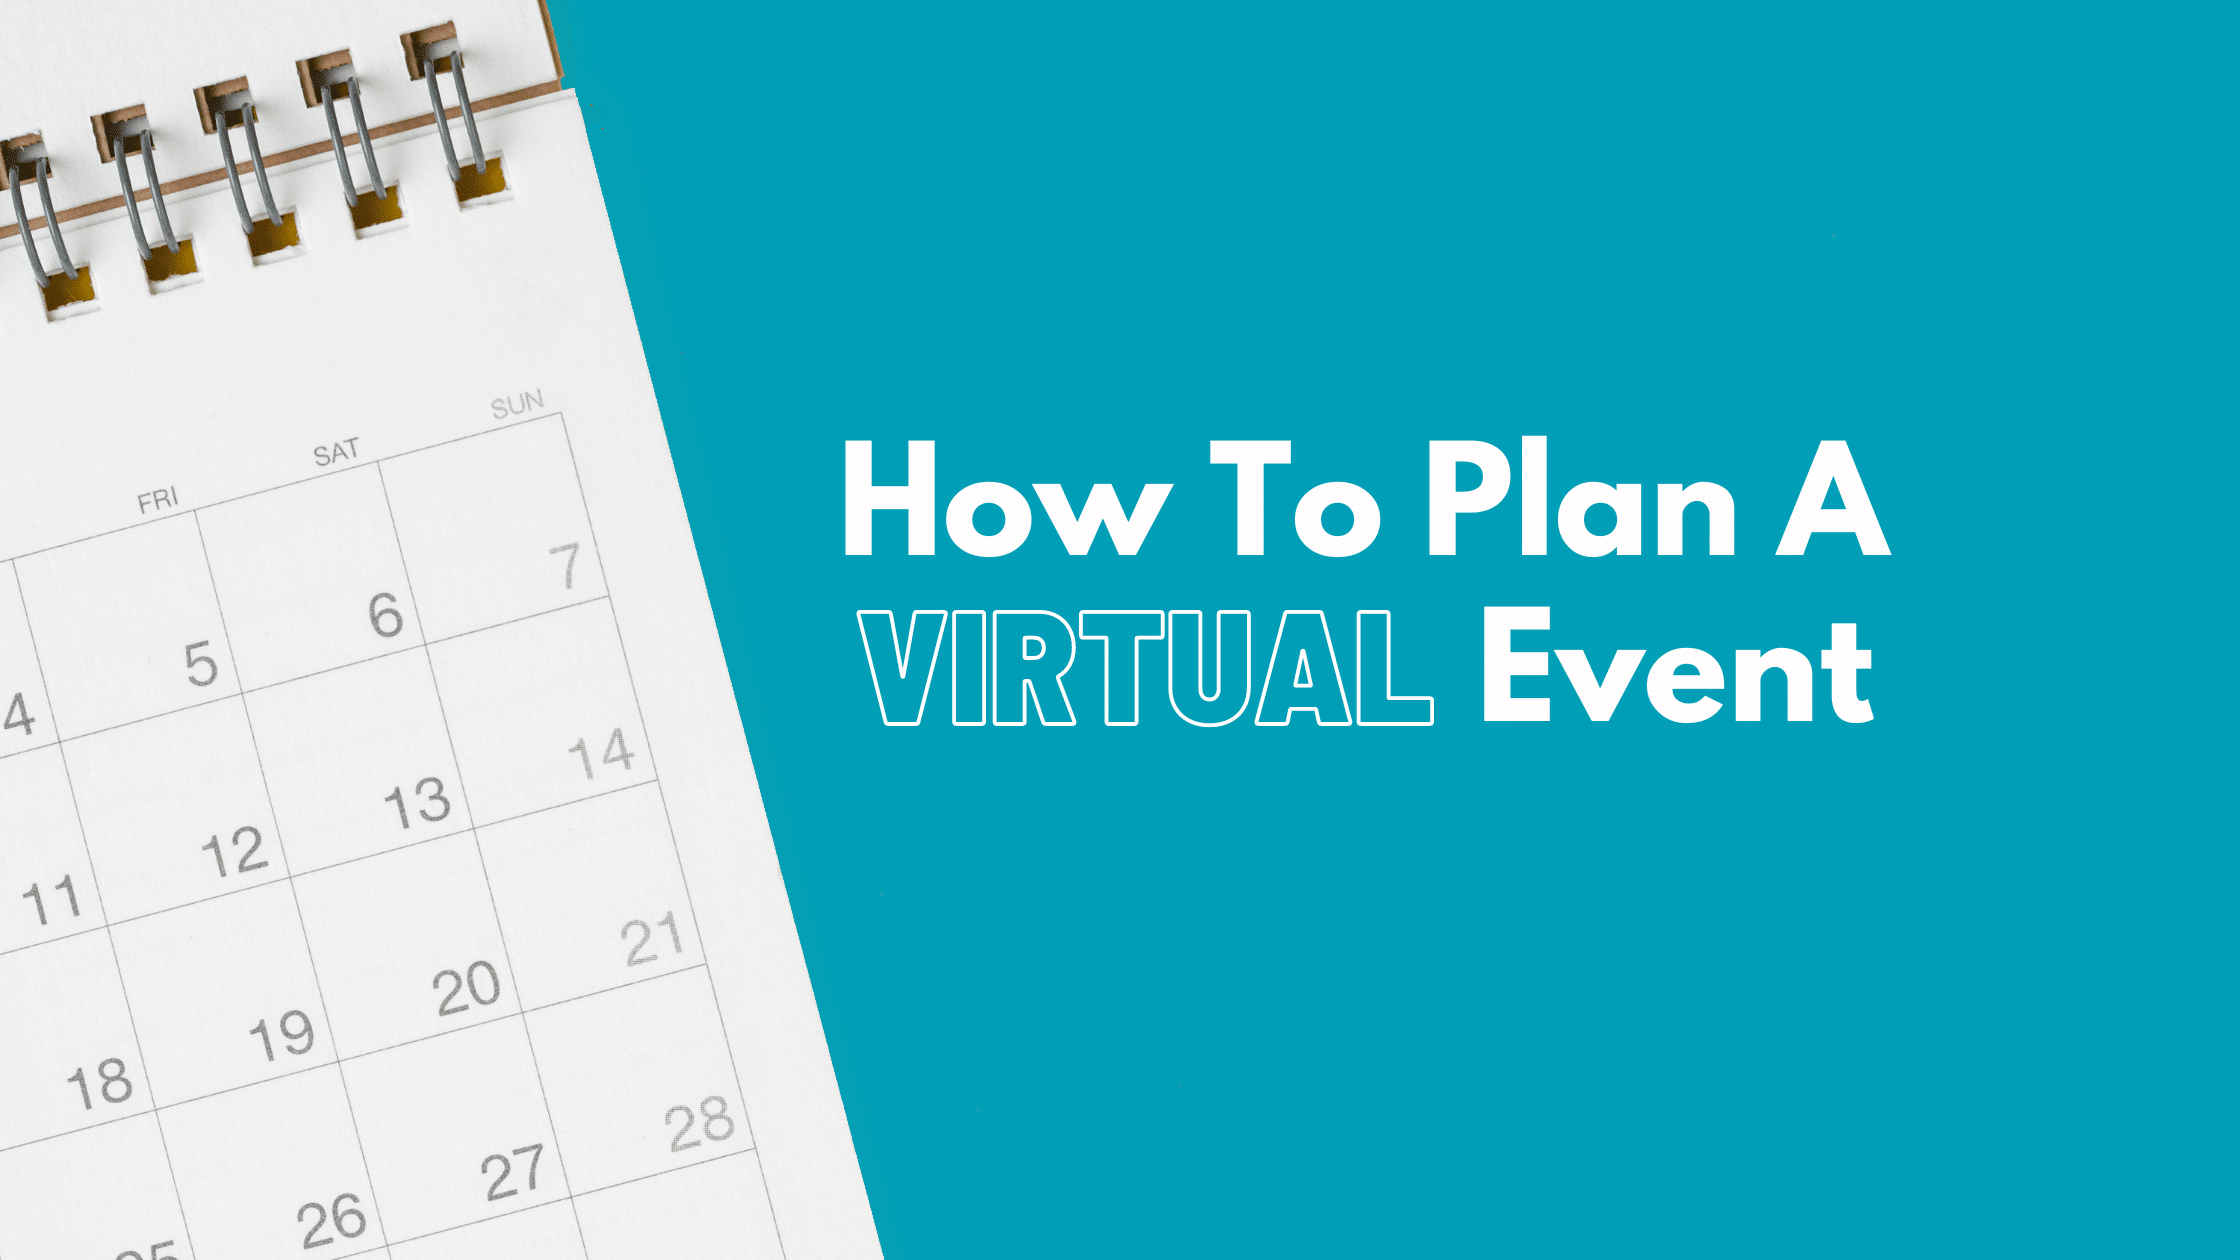 How To Plan A Virtual Event